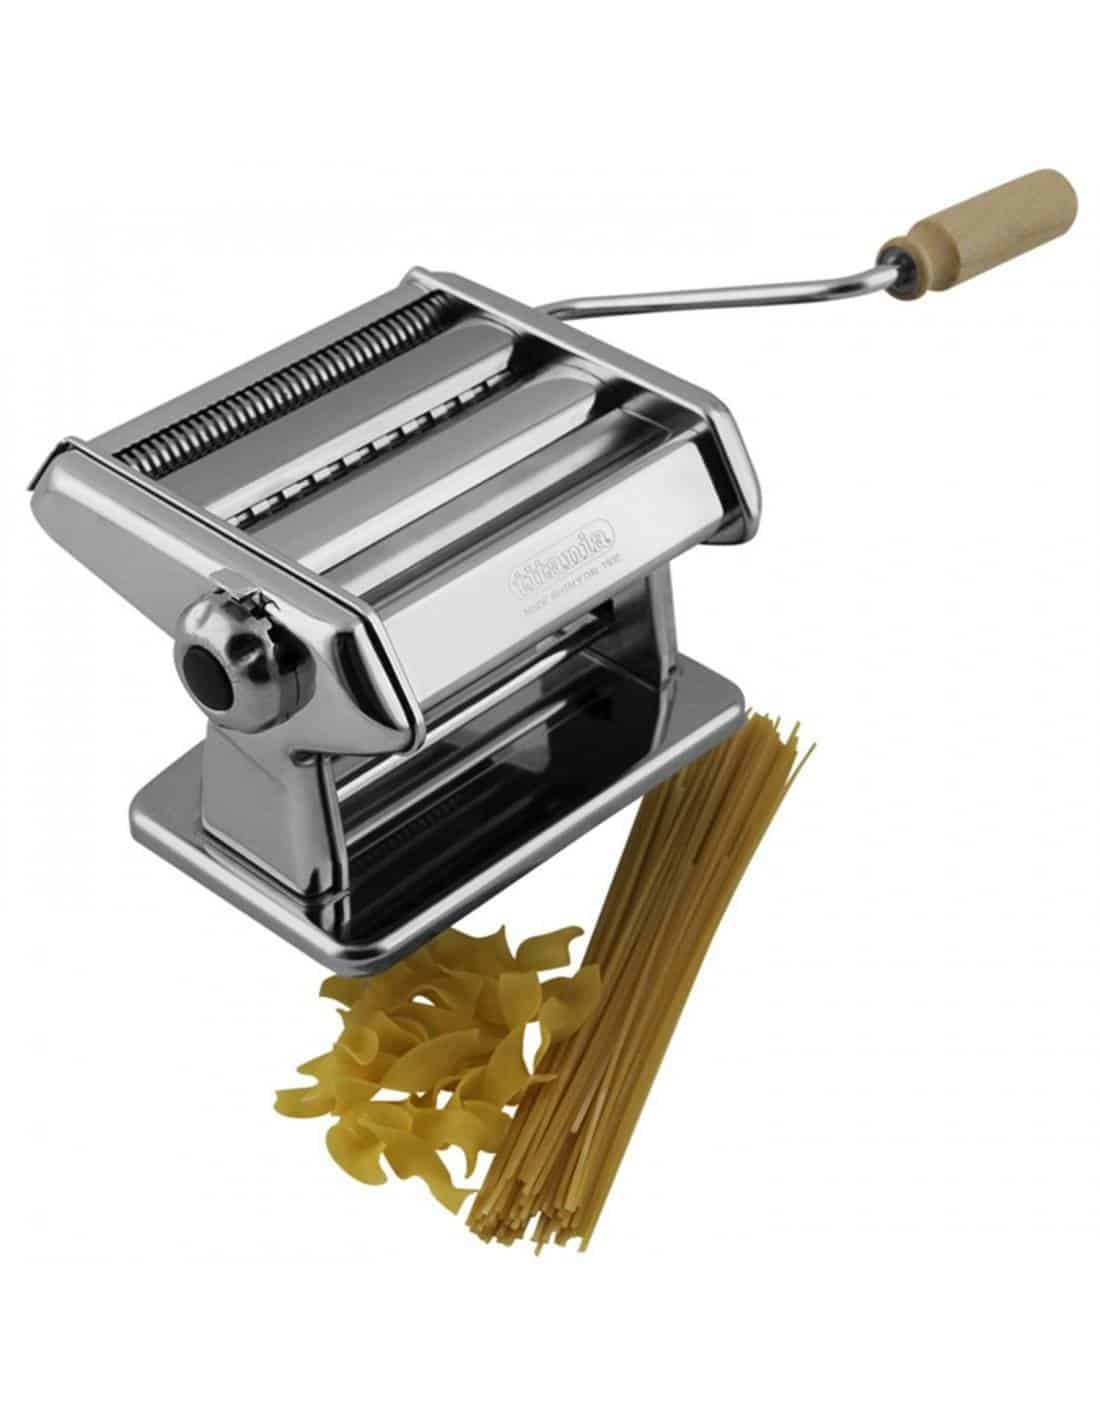 Imperia Titania Manual pasta machine with 2 cutters | MIMOCOOK - Online  Store